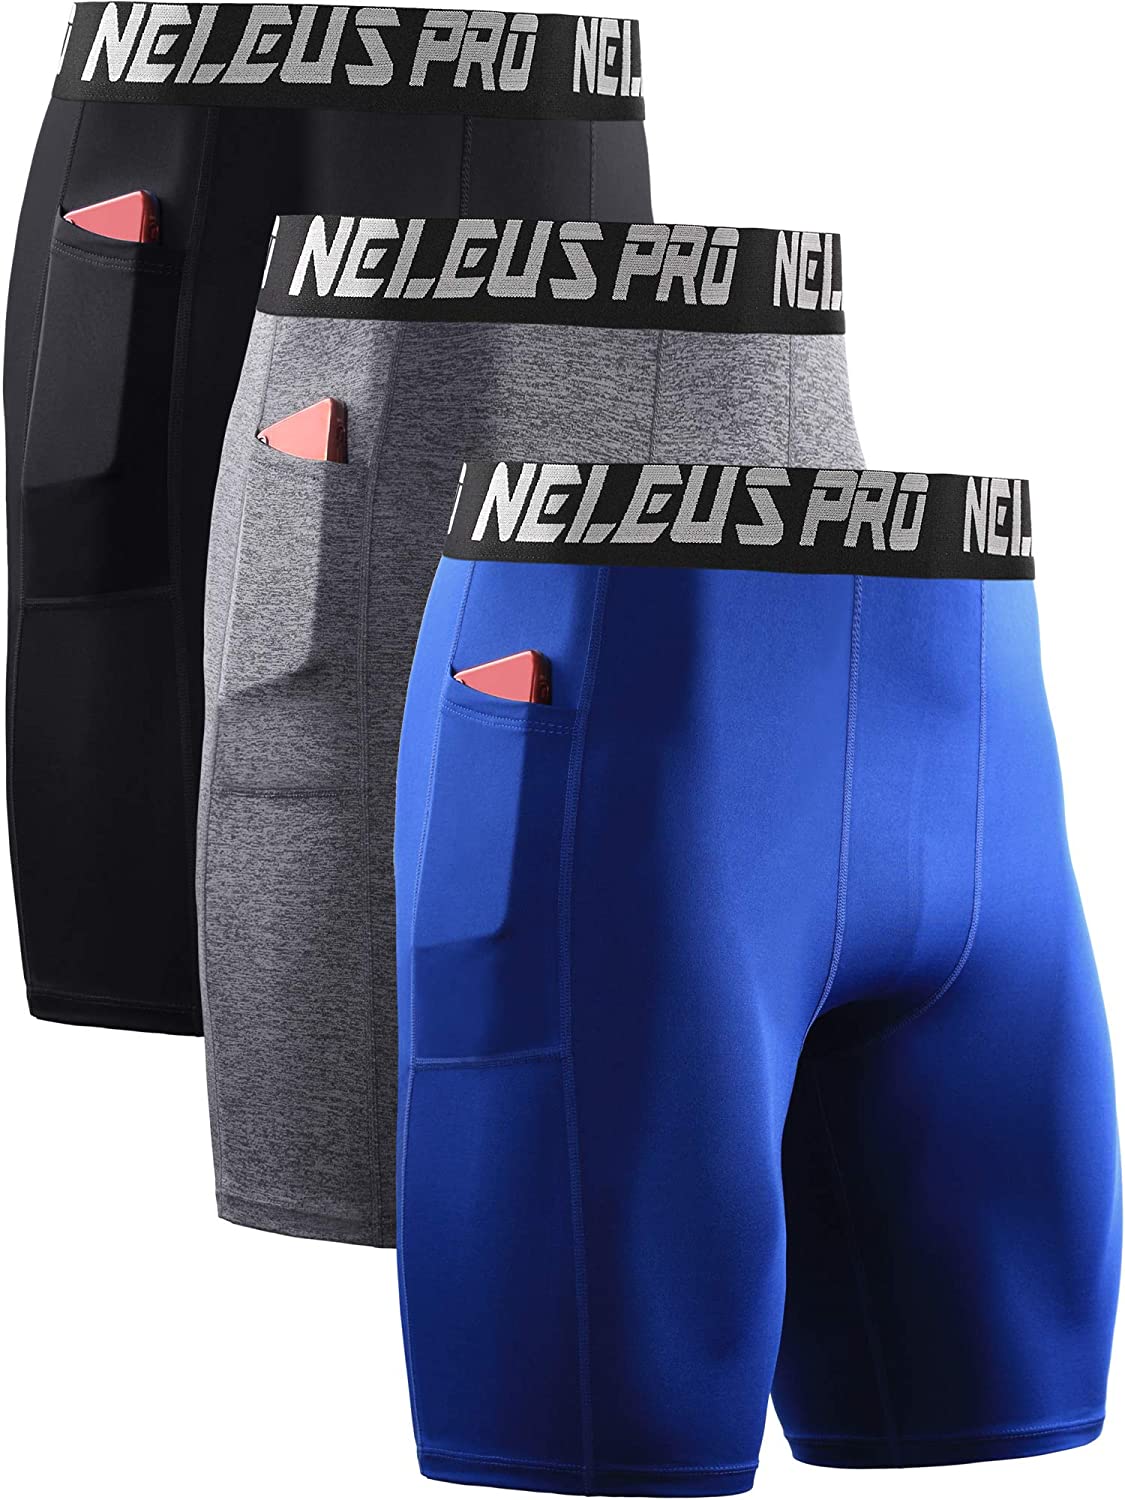 NELEUS Men's Dry Fit Compression Running Tights with Phone Pocket